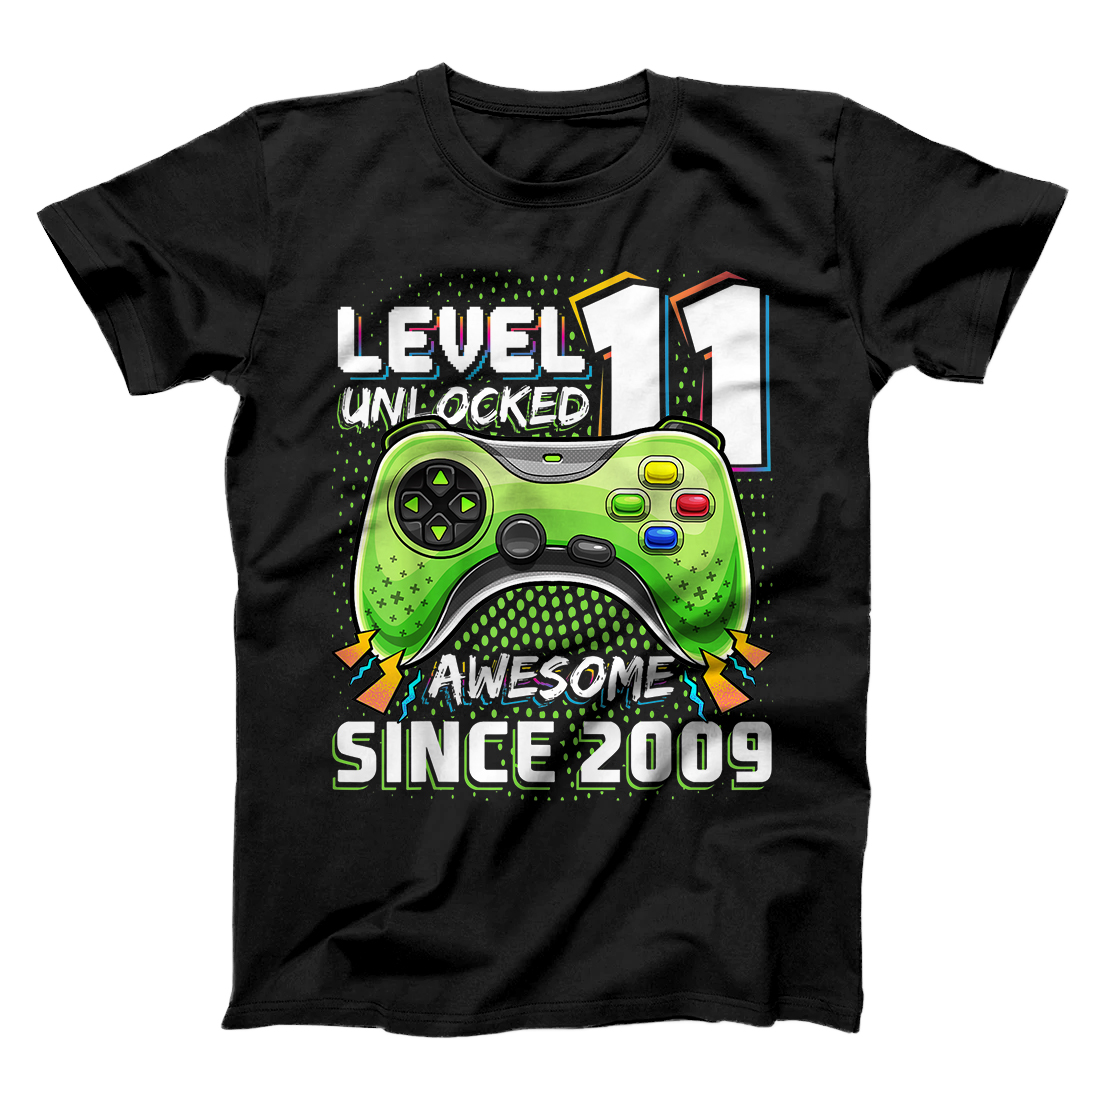 Personalized Level 11 Unlocked Awesome 2009 Video Game 11th Birthday Gift T-Shirt